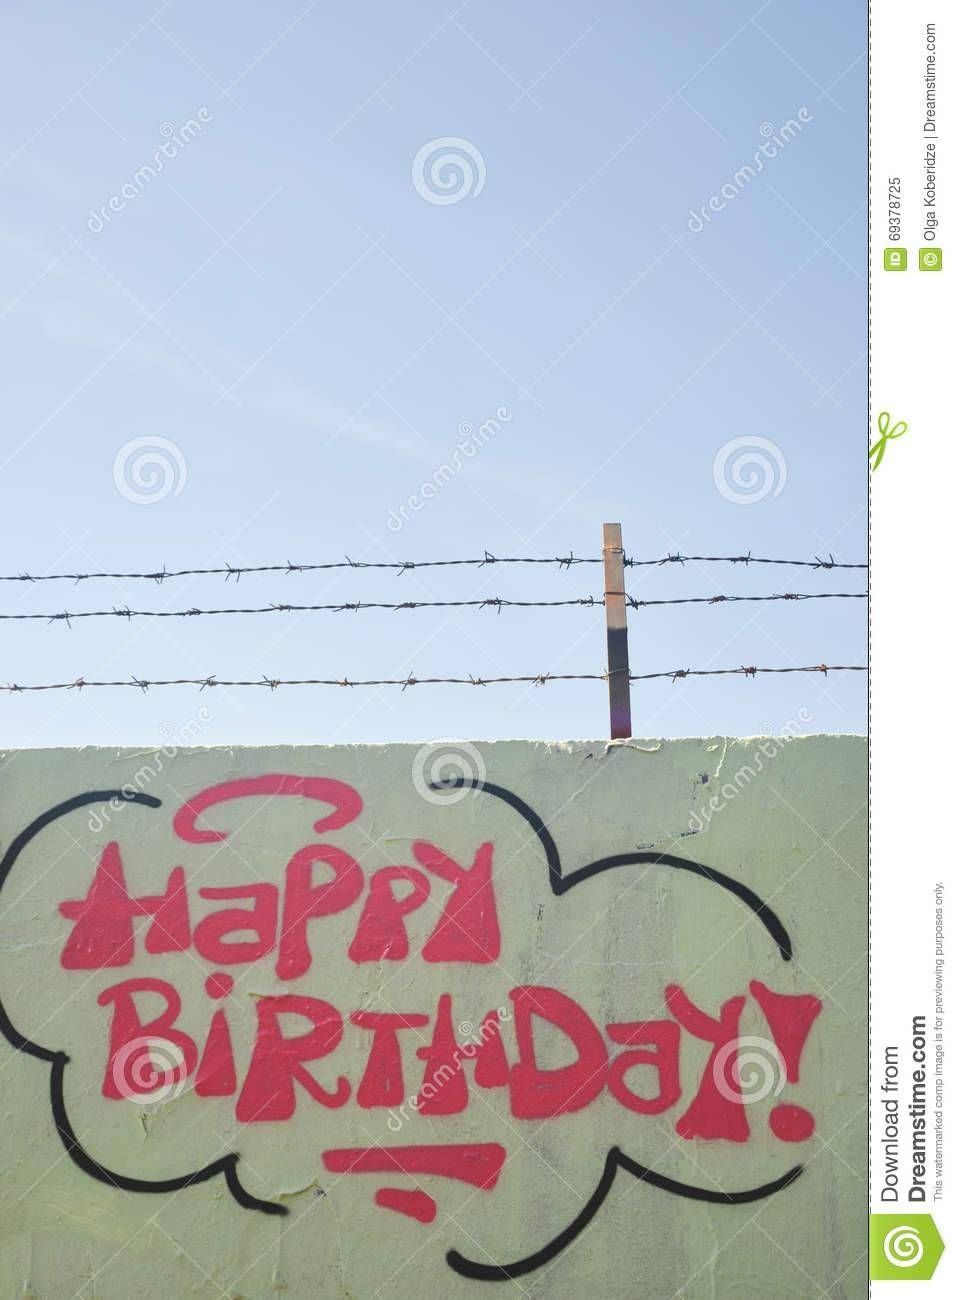 Part Drawing Graffiti – Wall With Happy Birthday Sign Stock Image Throughout Most Up To Date Happy Birthday Wall Art (View 5 of 20)